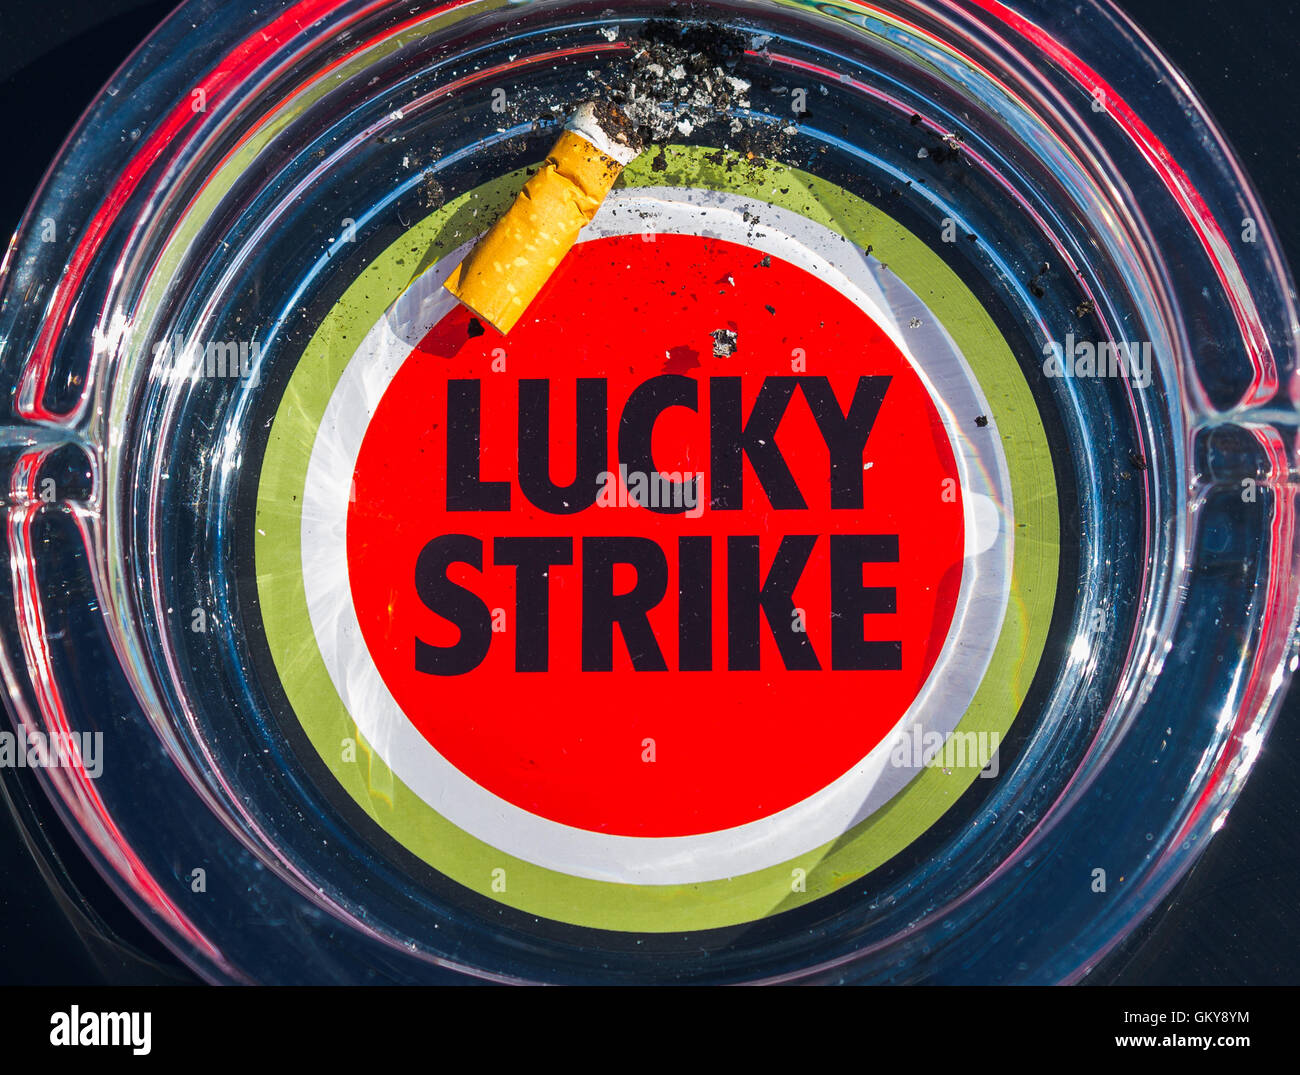 Bayreuth, Germany. 24th Aug, 2016. An ash tray with the Lucky Strike logo on it can be seen in Bayreuth, Germany, 24 August 2016. The tobacco company British American Tobacco (BAT) plans to cut 950 positions due to heavy sales losses at Bayreuth. Photo: NICOLAS ARMER/dpa/Alamy Live News Stock Photo